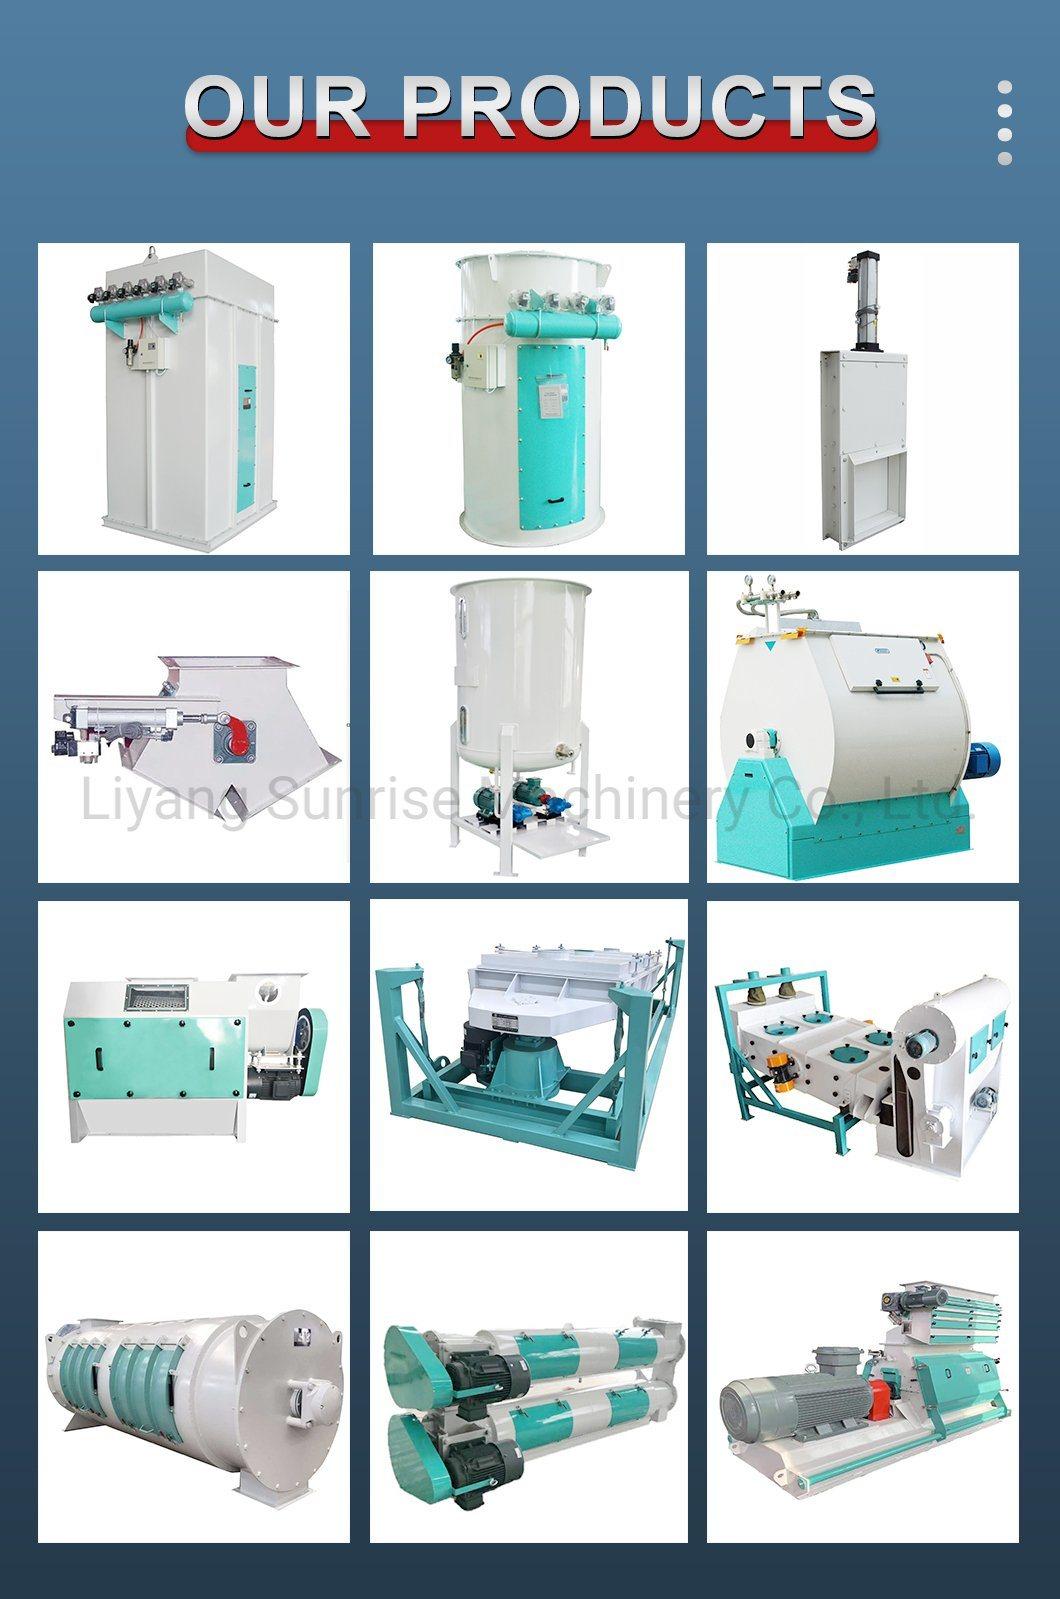 Factory Price Pulse Dust Collector for Grain, Food and Other Industries